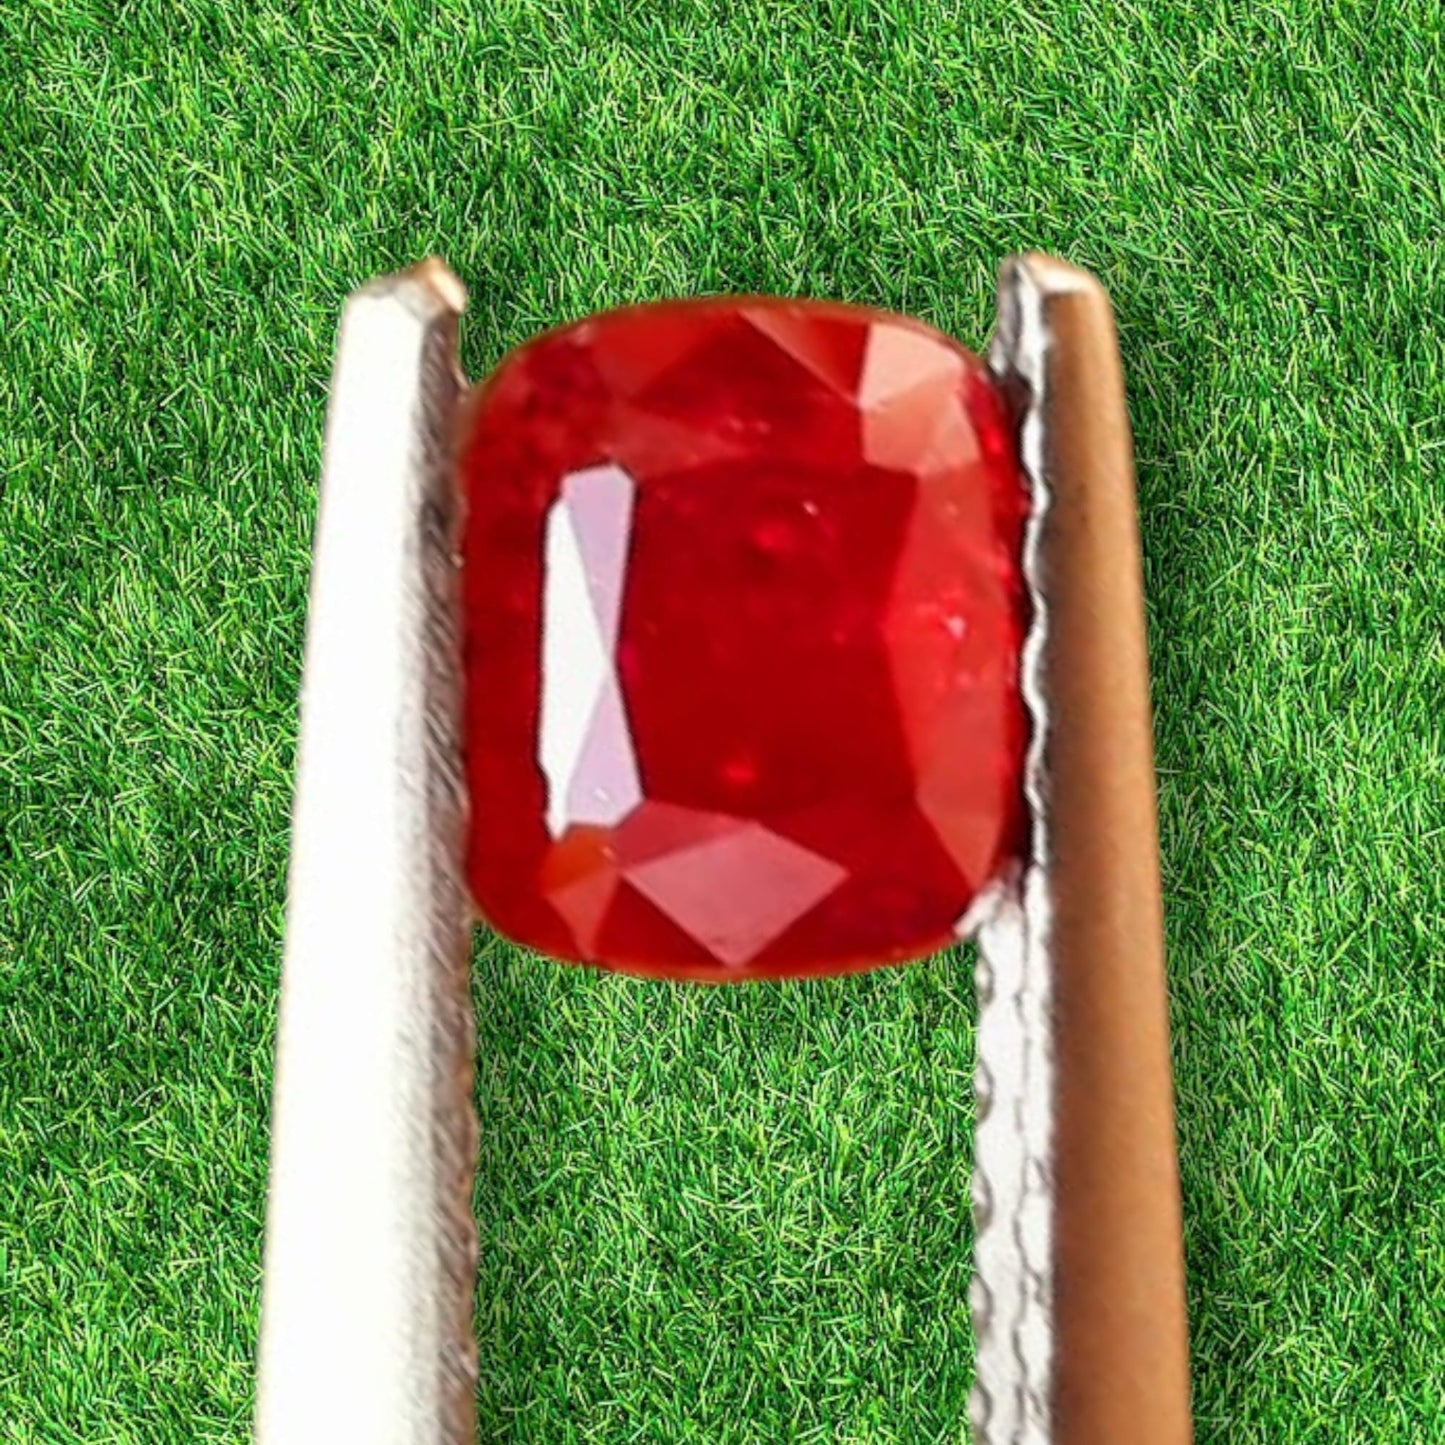 Loose natural unheated 0.77 ct. Kashmir red Ruby with inclusions.